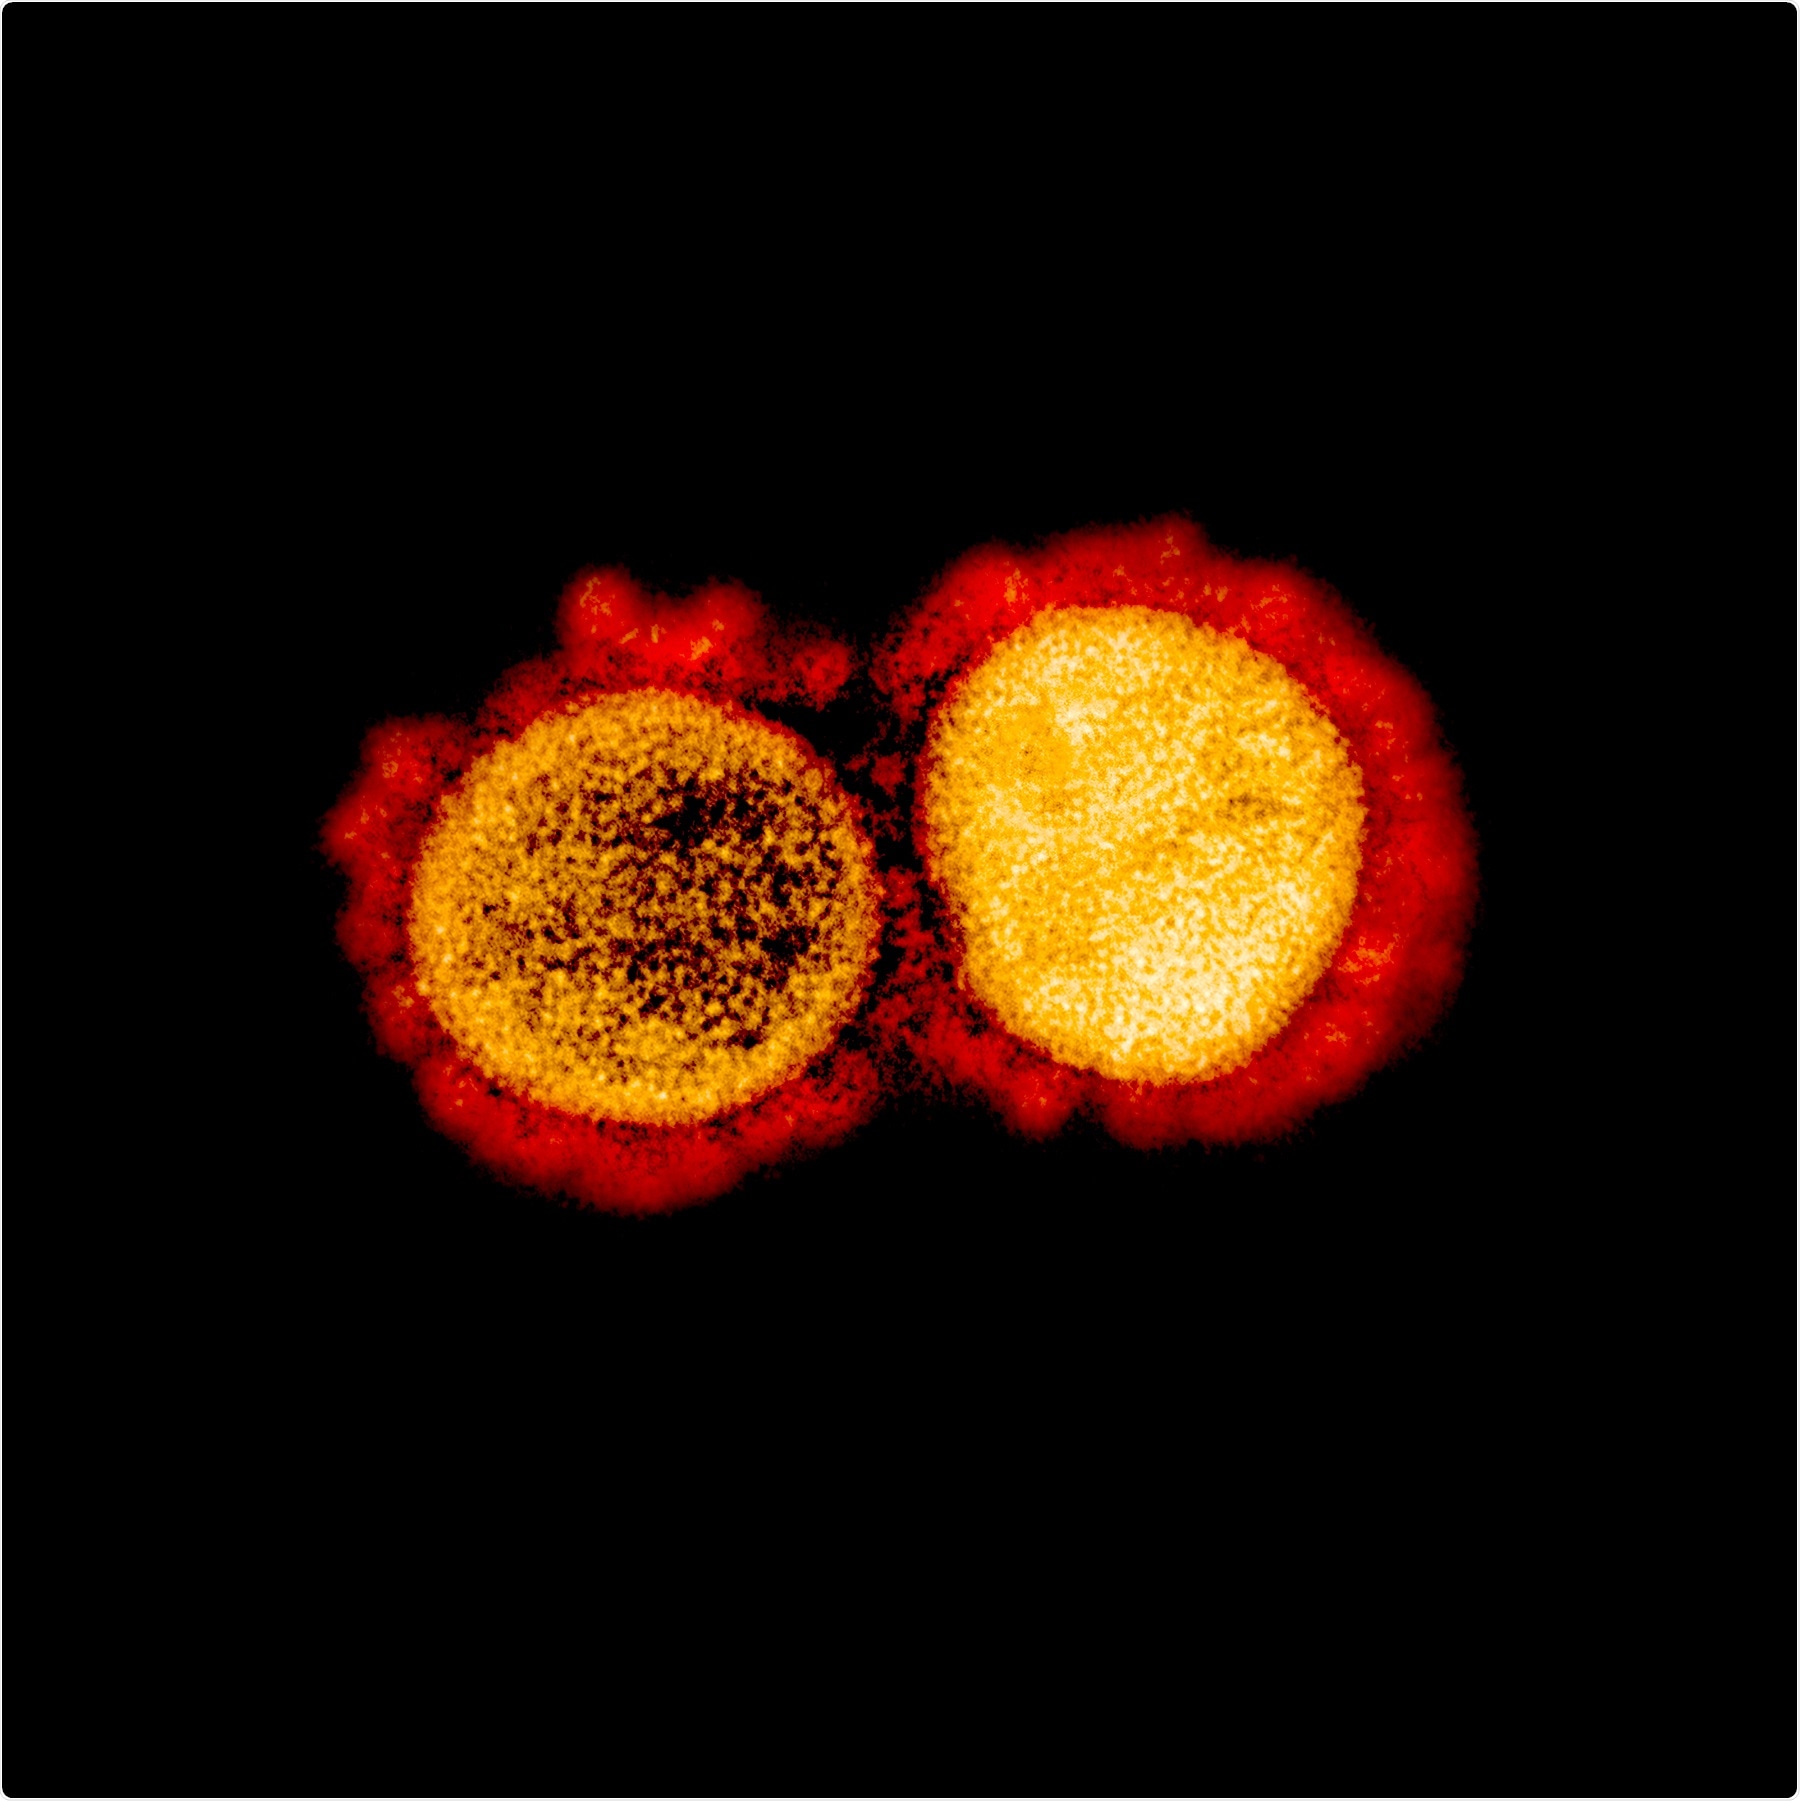 ransmission electron micrograph of SARS-CoV-2 virus particles, isolated from a patient. Image captured and color-enhanced at the NIAID Integrated Research Facility (IRF) in Fort Detrick, Maryland. Credit: NIAID